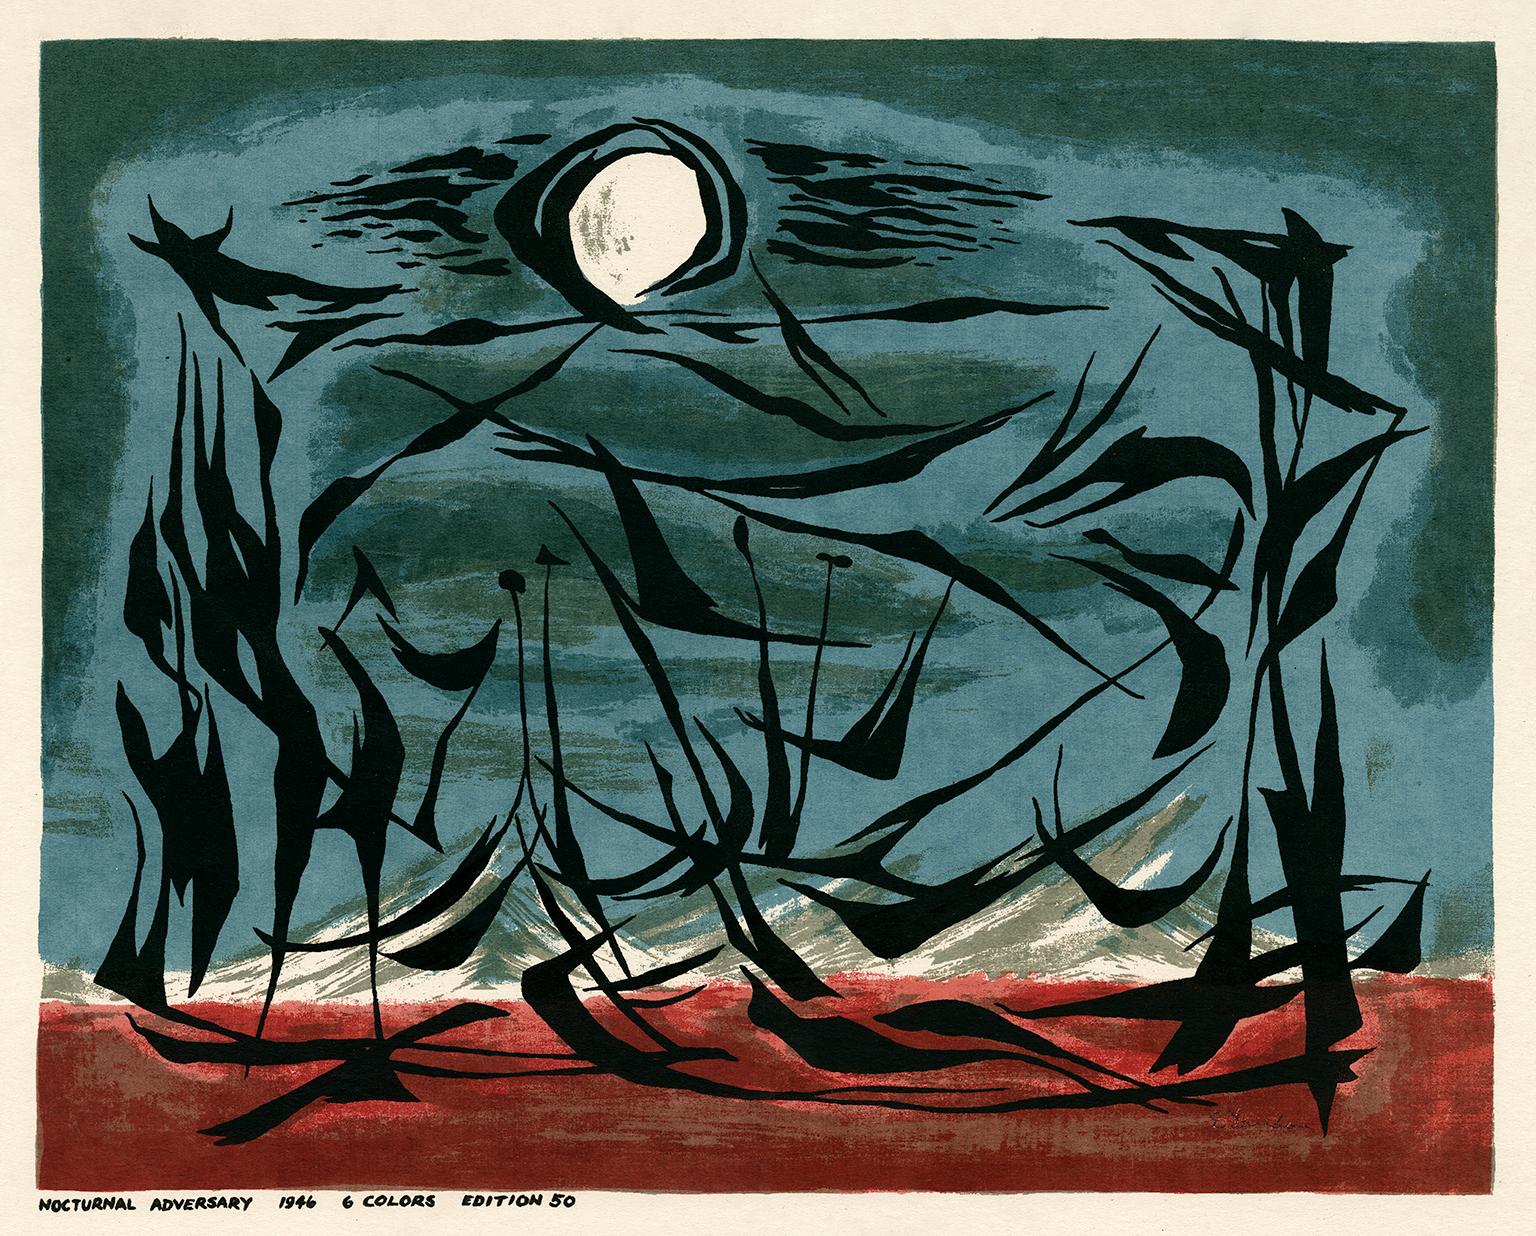 Edward August Landon Abstract Print - 'Nocturnal Adversary' — 1940s Surrealist Abstraction